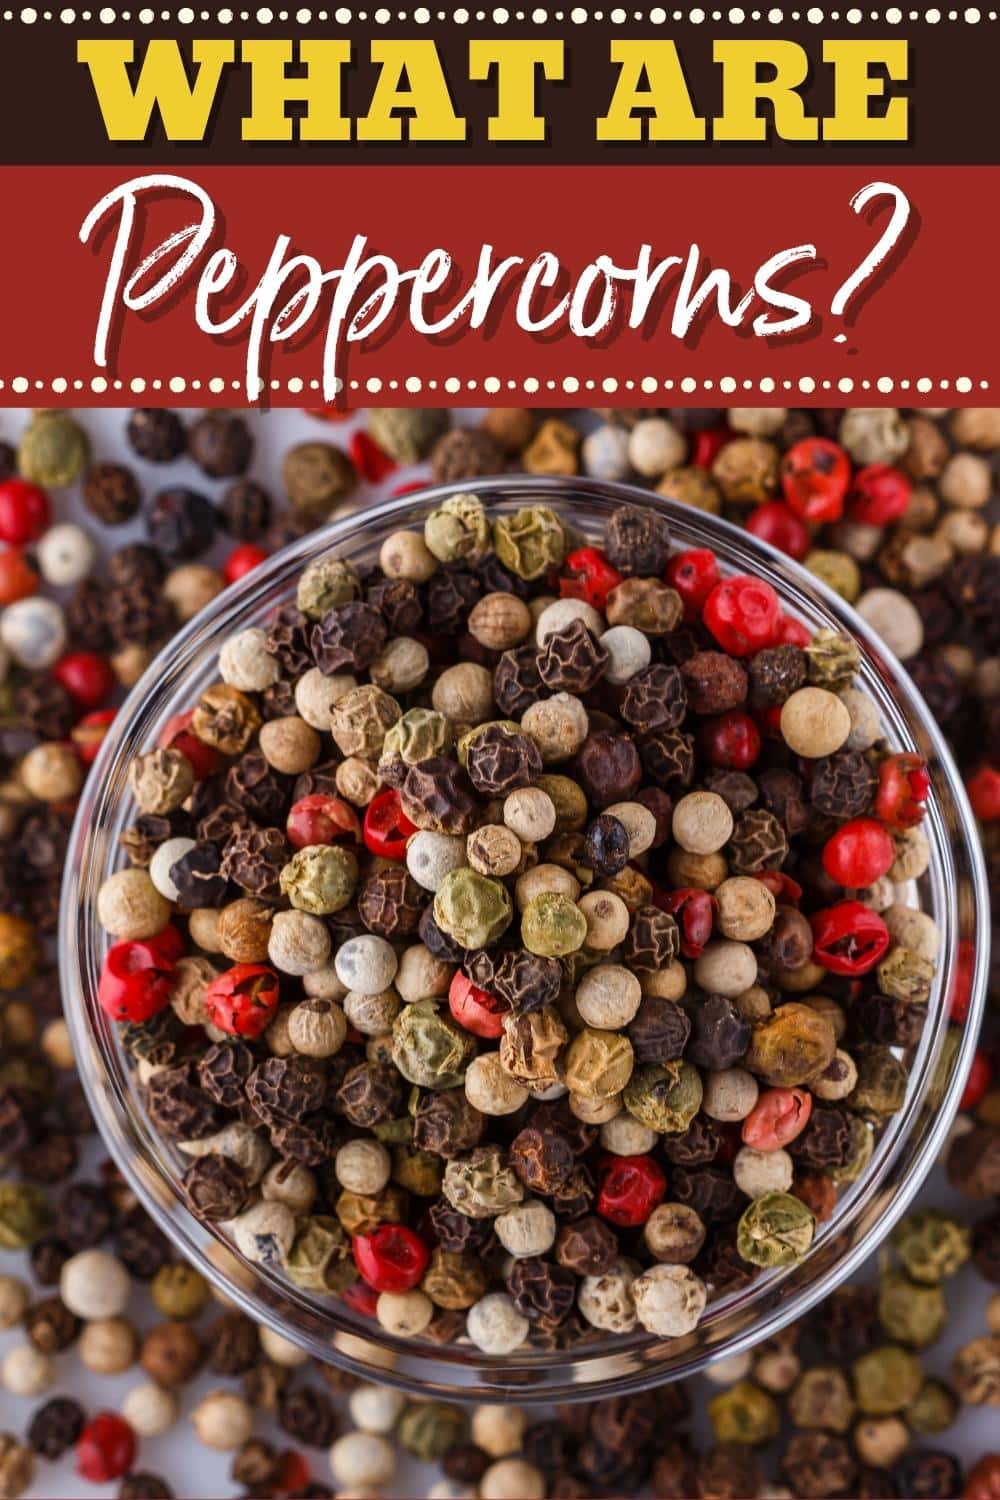 What Are Peppercorns?